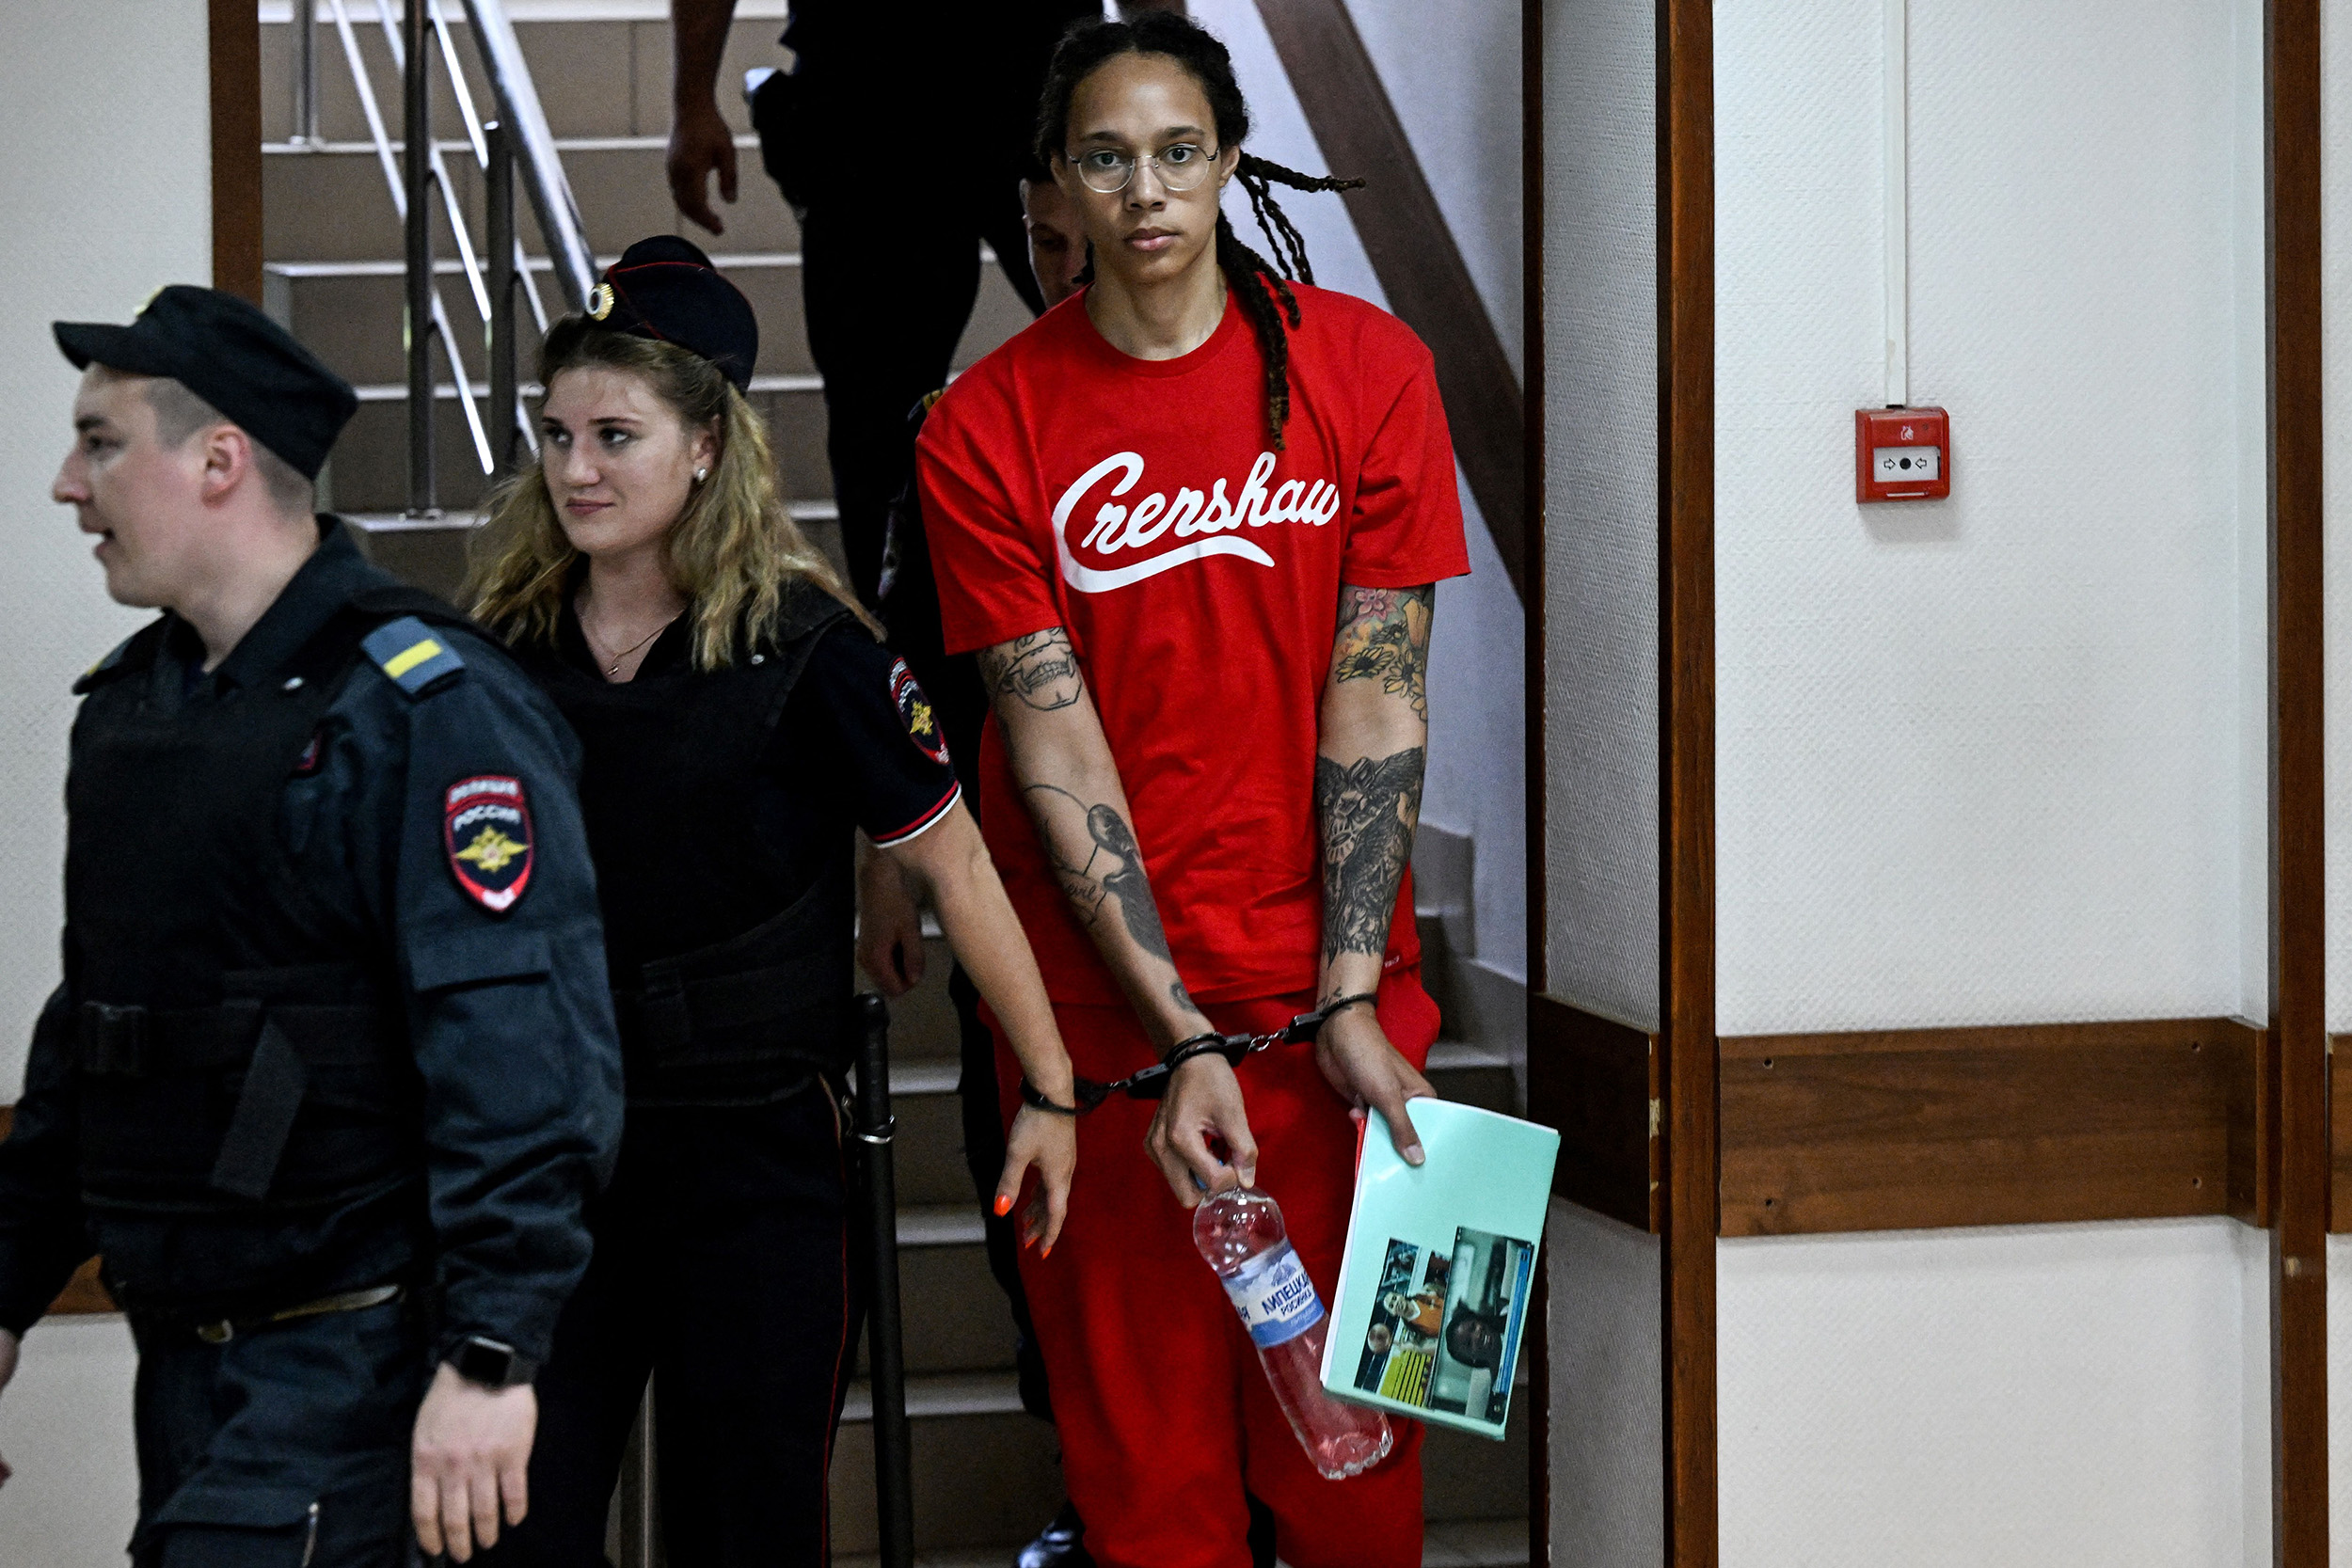 US WNBA basketball superstar Brittney Griner arrives to a hearing at the Khimki Court, Russia, on July 7.